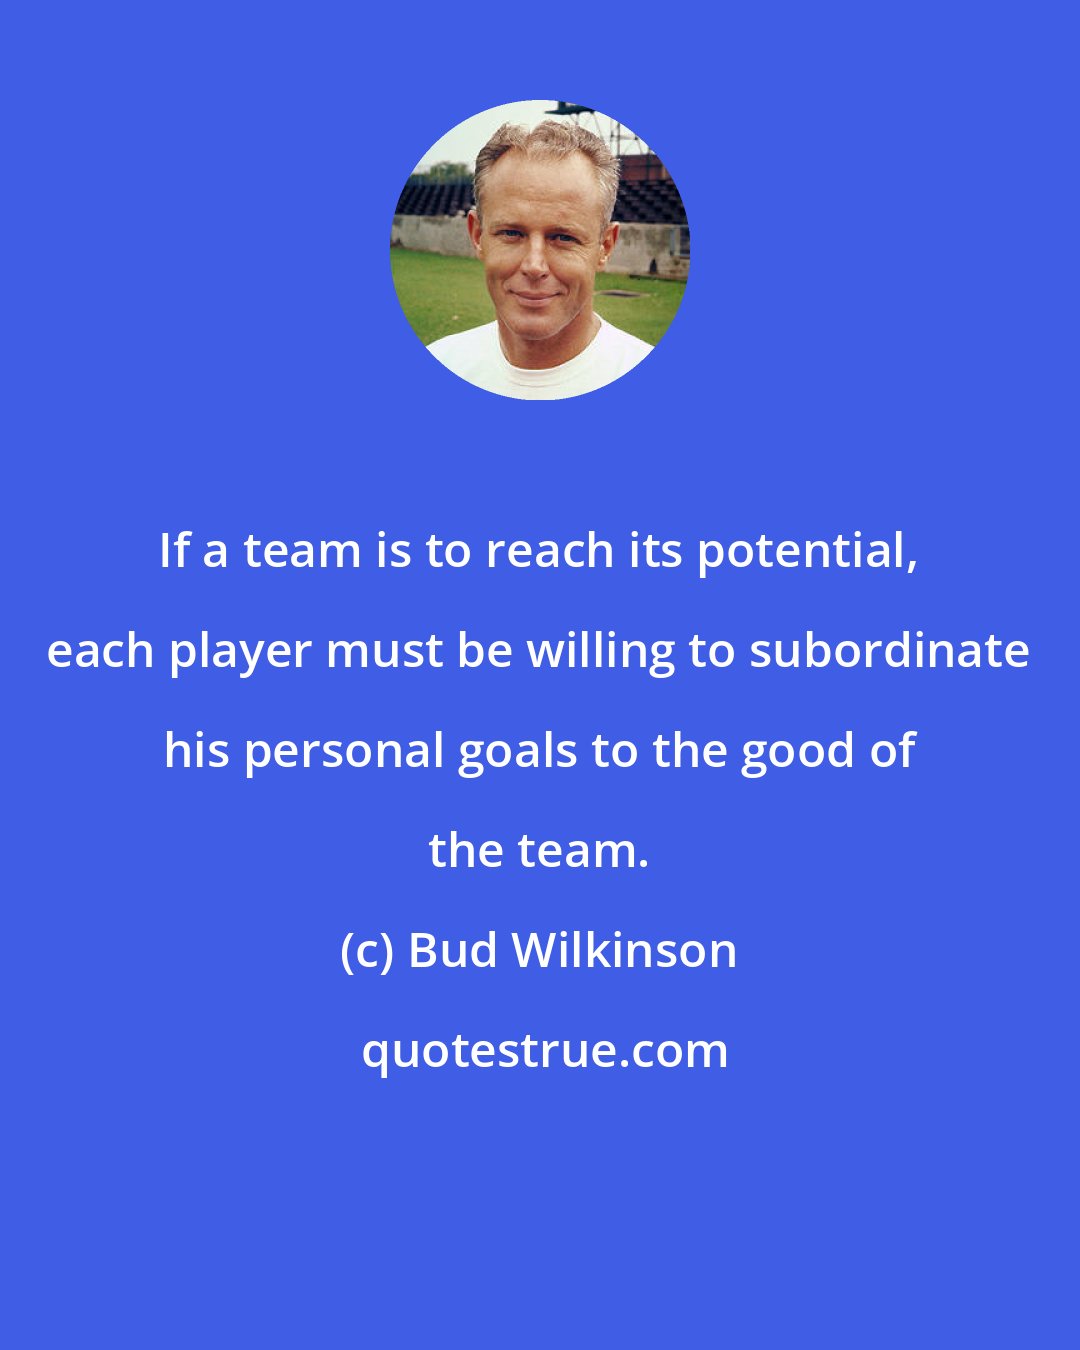 Bud Wilkinson: If a team is to reach its potential, each player must be willing to subordinate his personal goals to the good of the team.